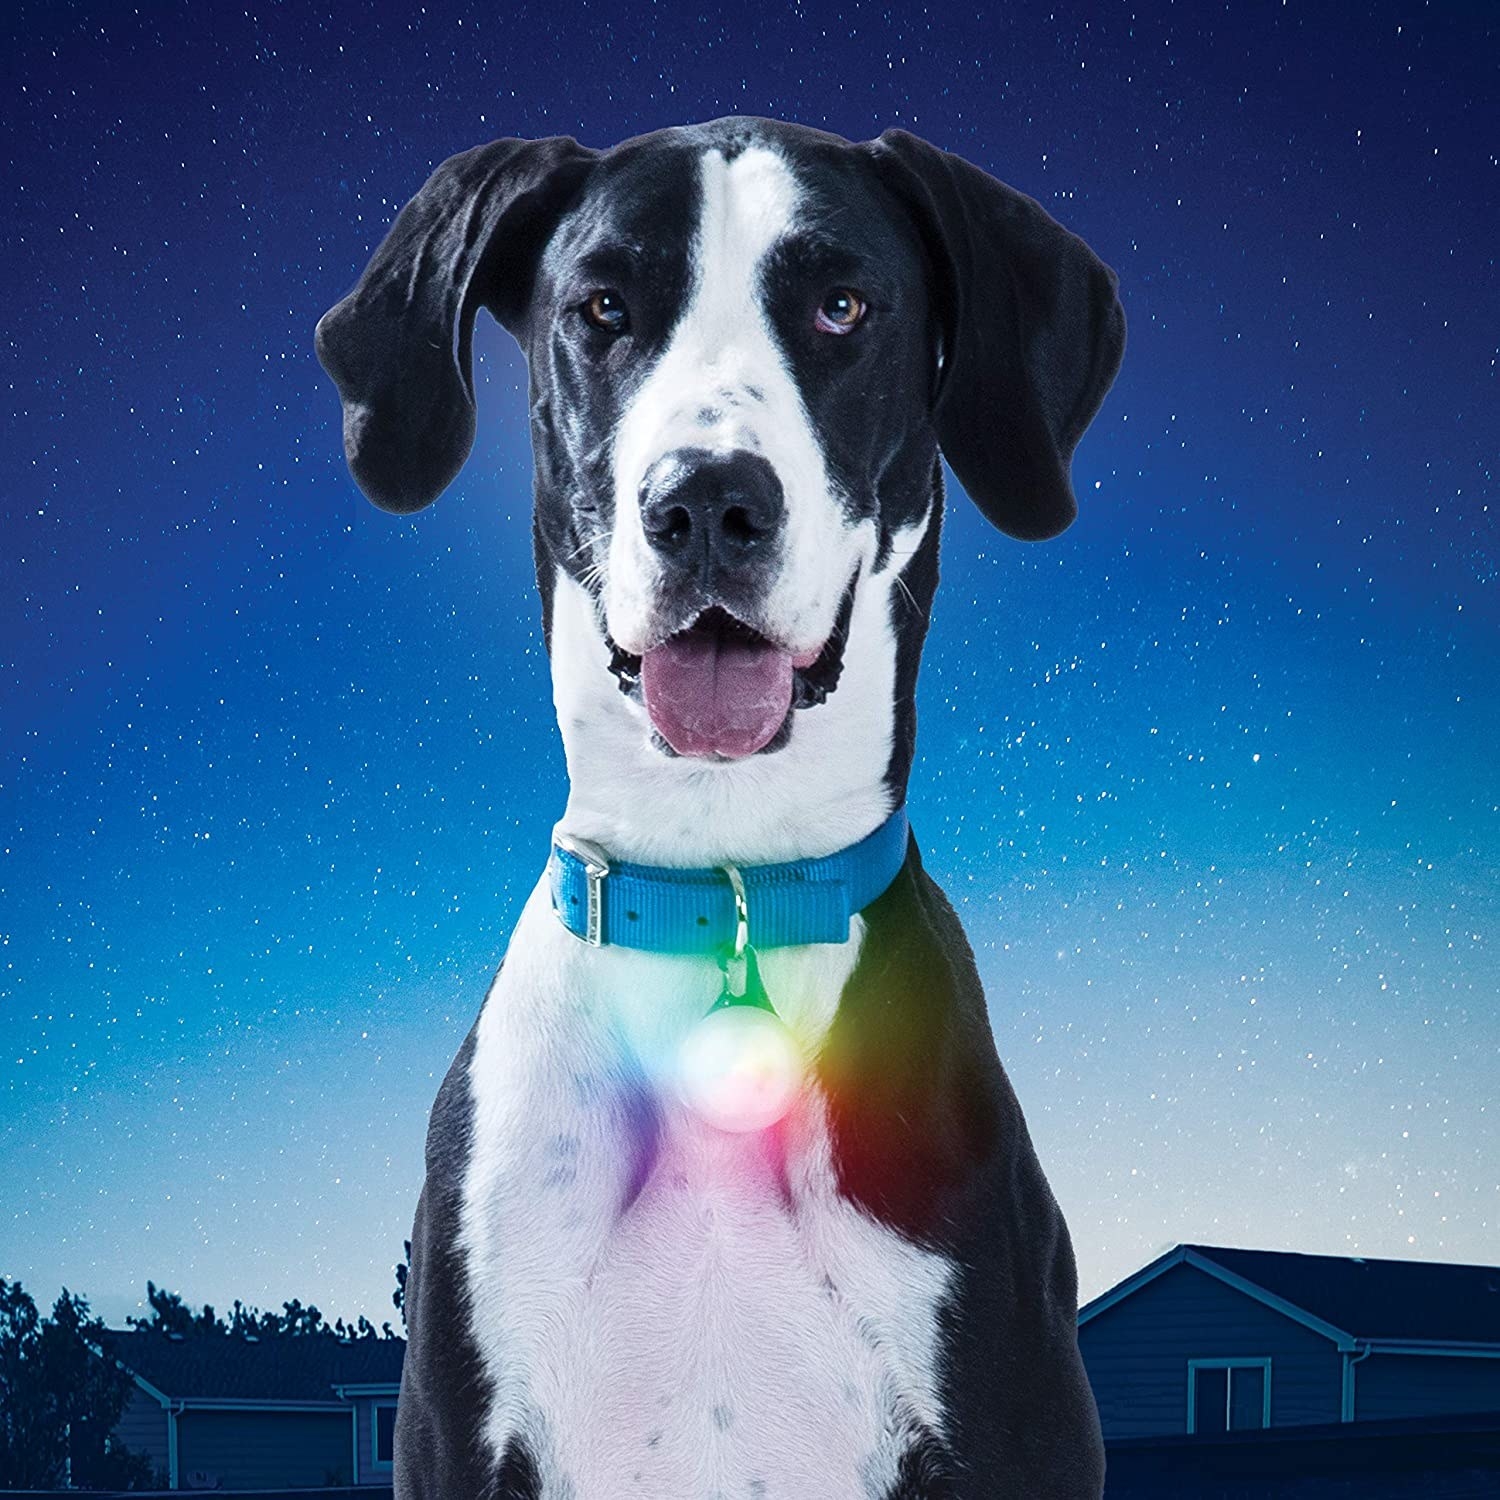 A dog wearing the glowing light on its collar